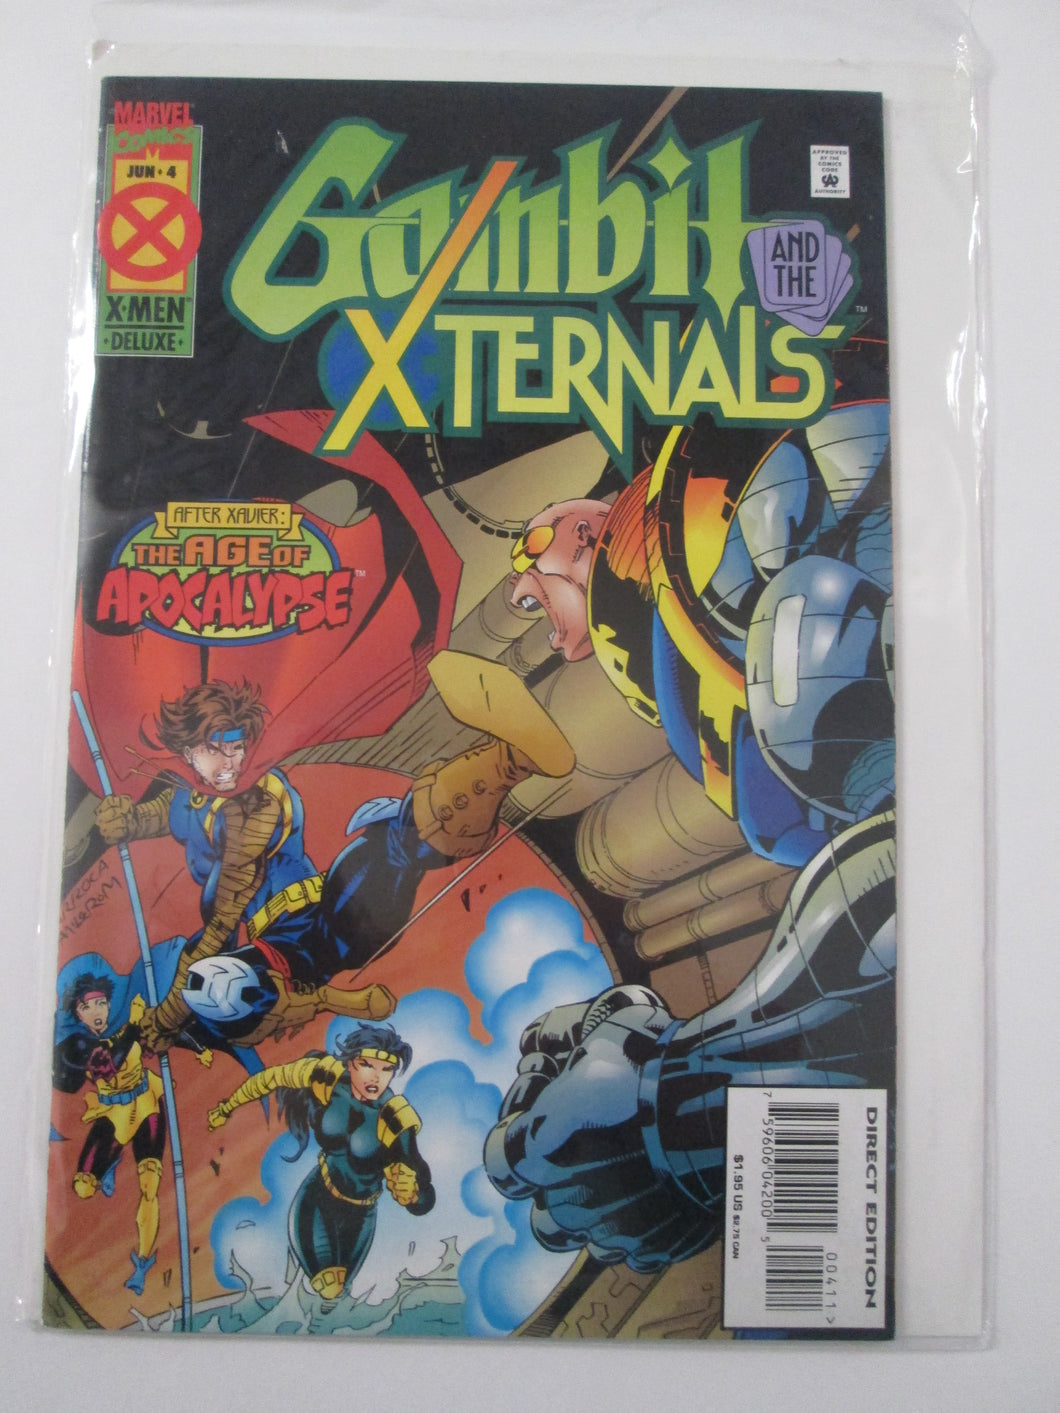 Gambit and the Externals #4